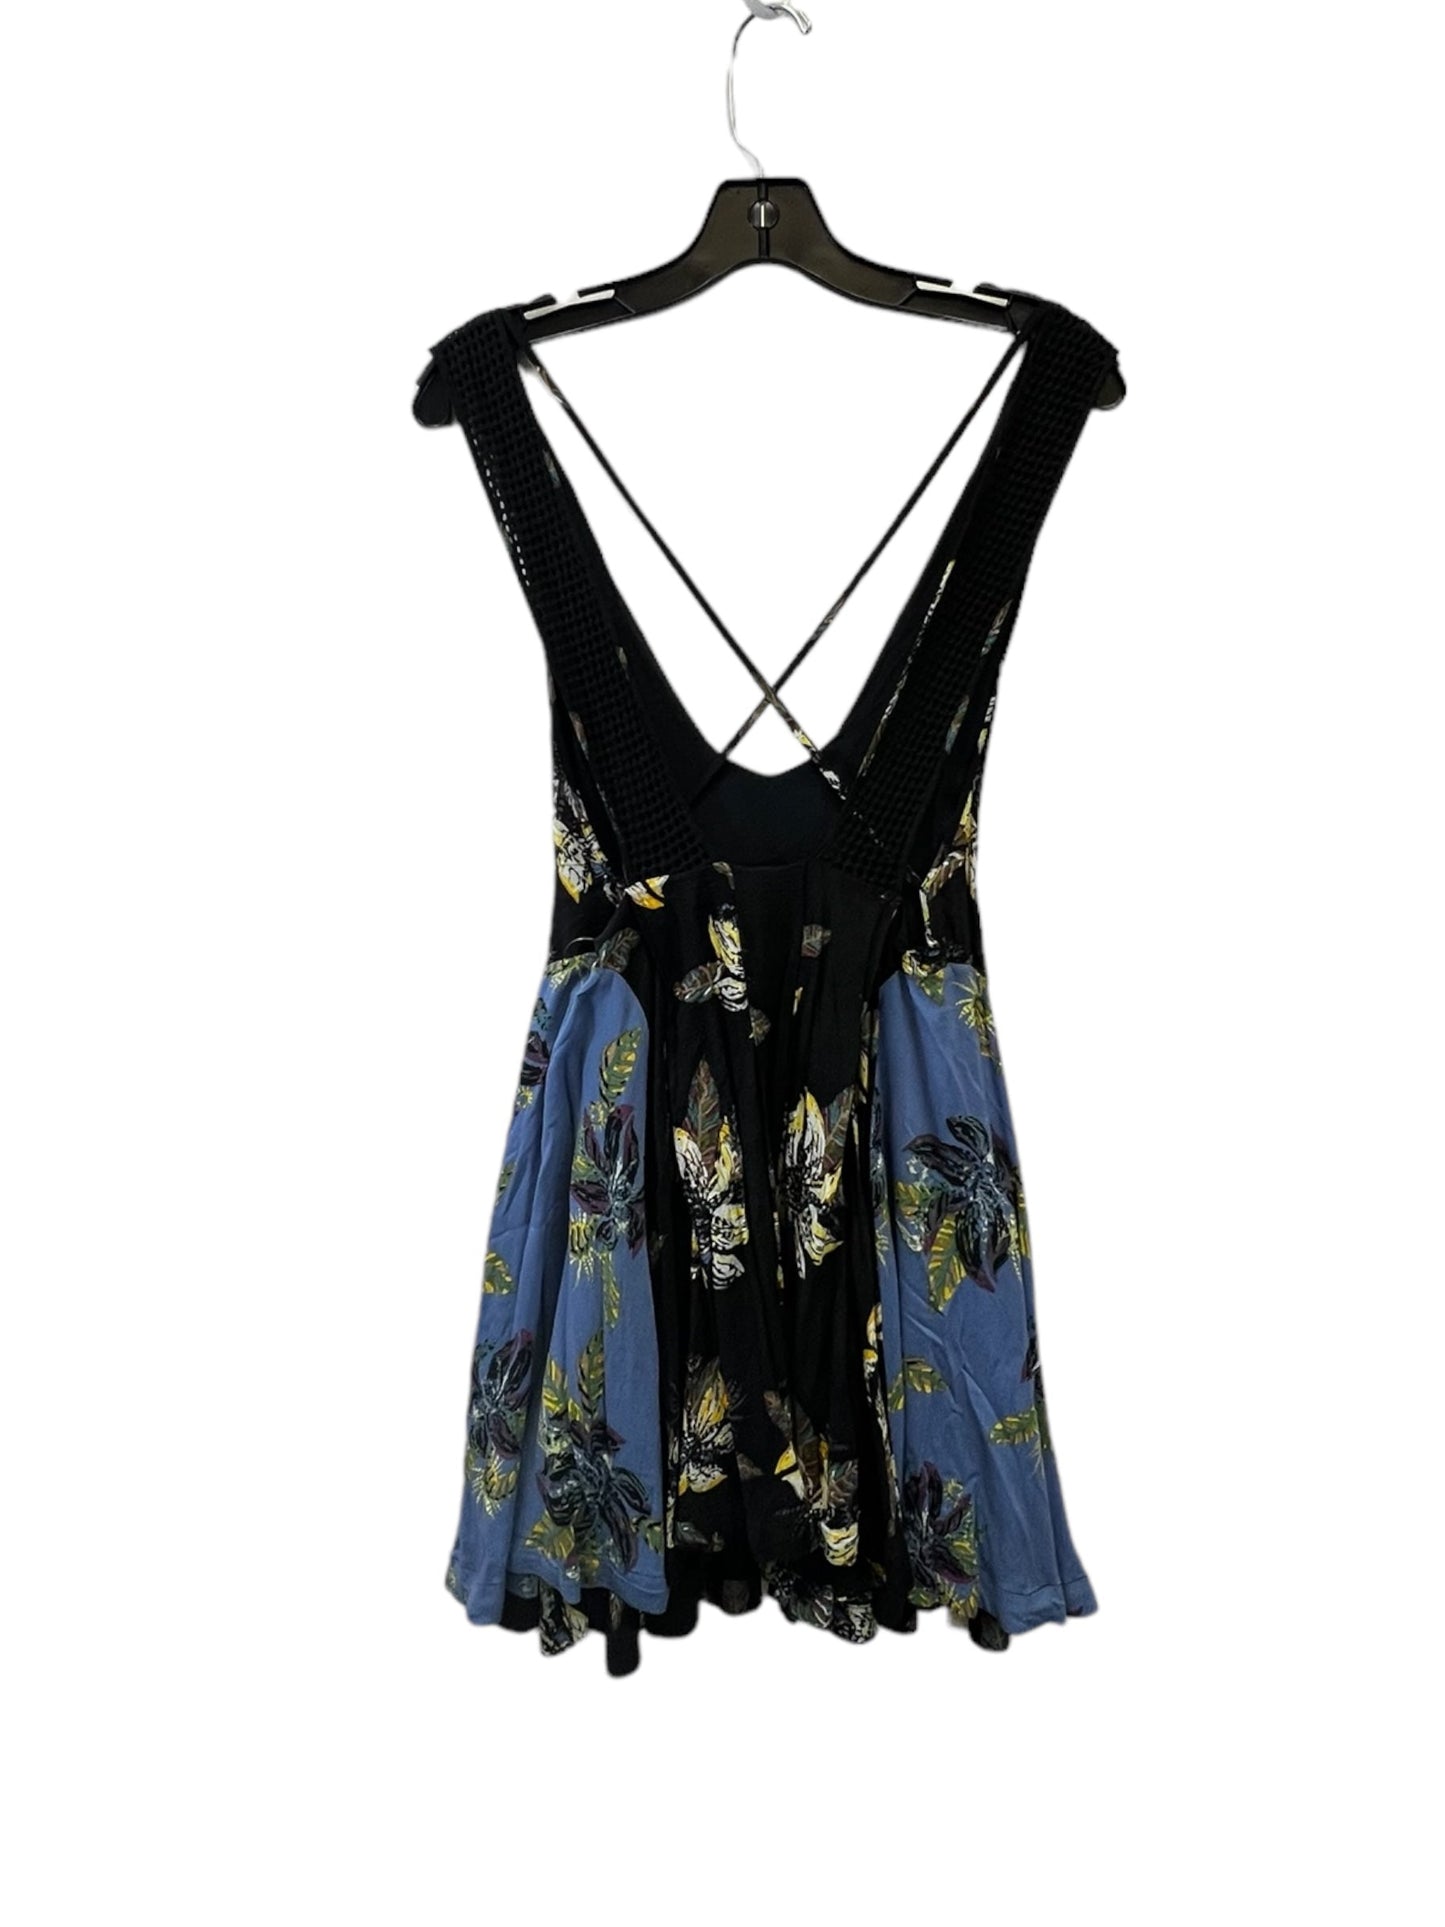 Floral Print Dress Casual Short Free People, Size Xs